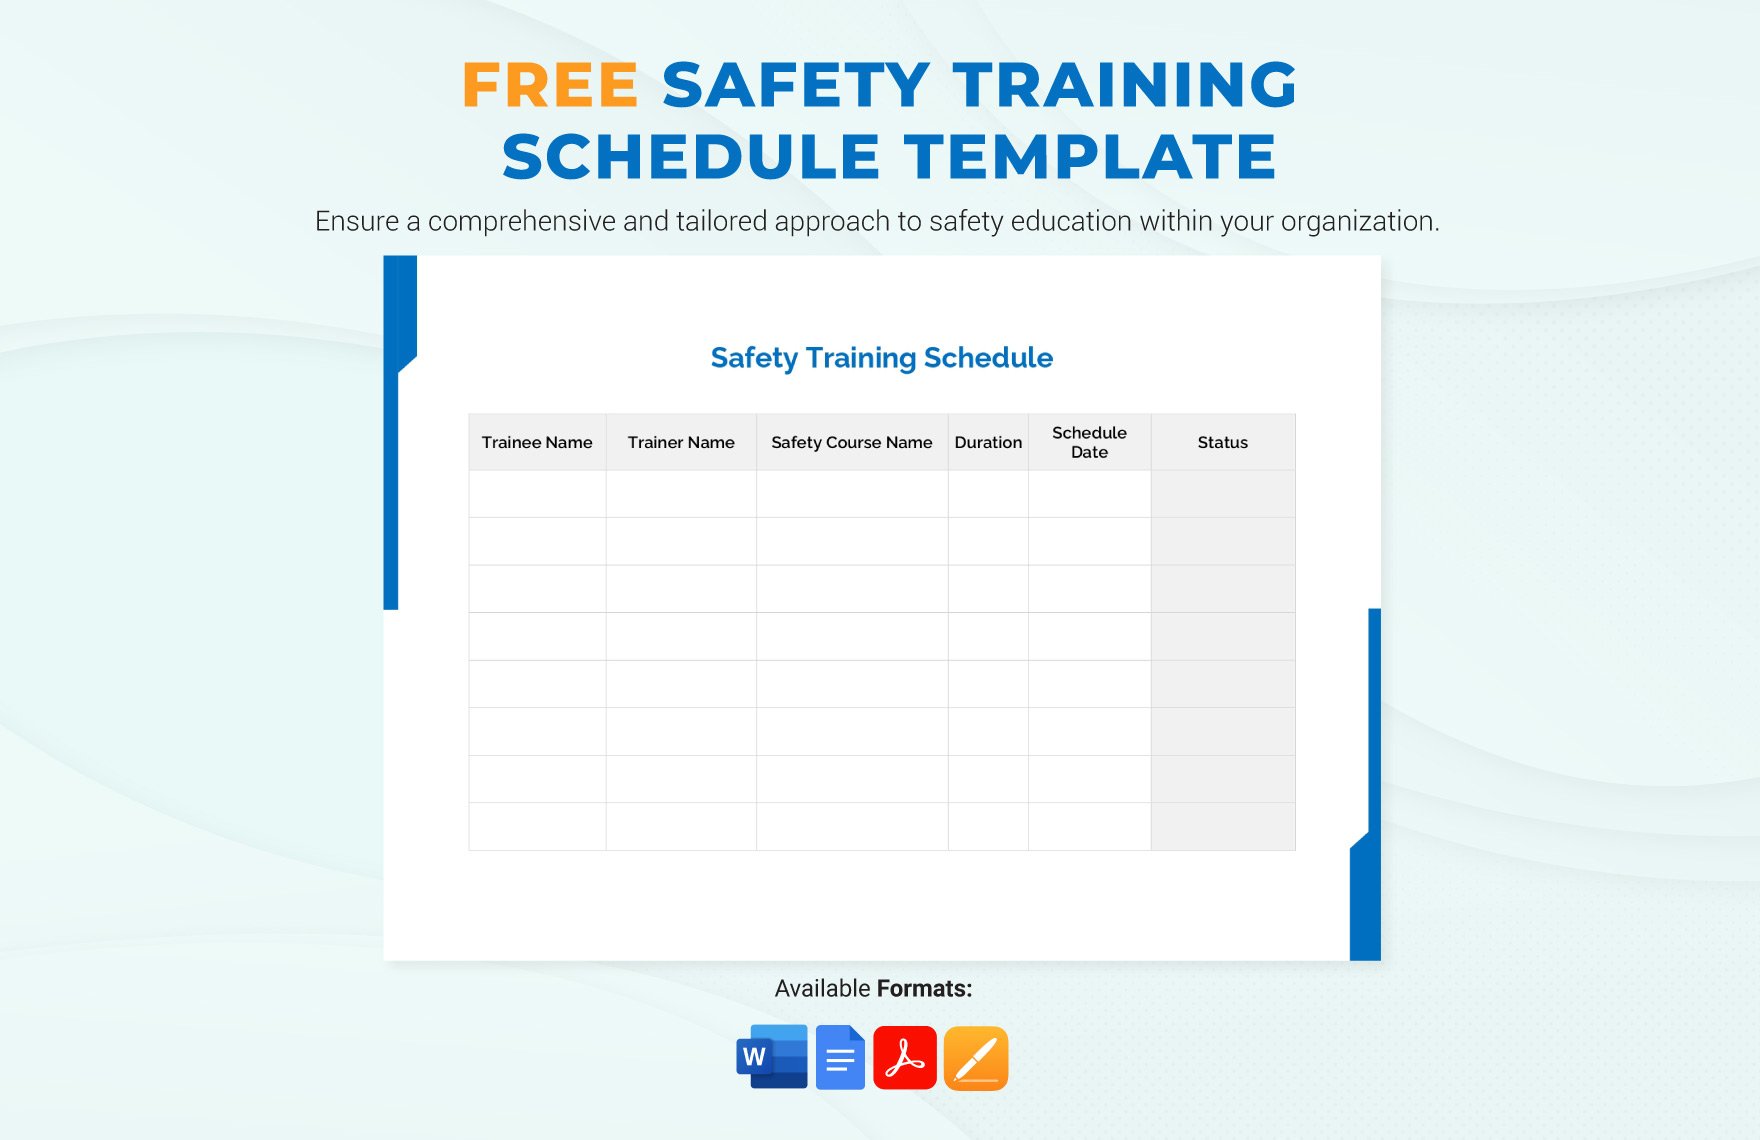 Free Safety Training Schedule Template in Word, Google Docs, PDF, Apple Pages